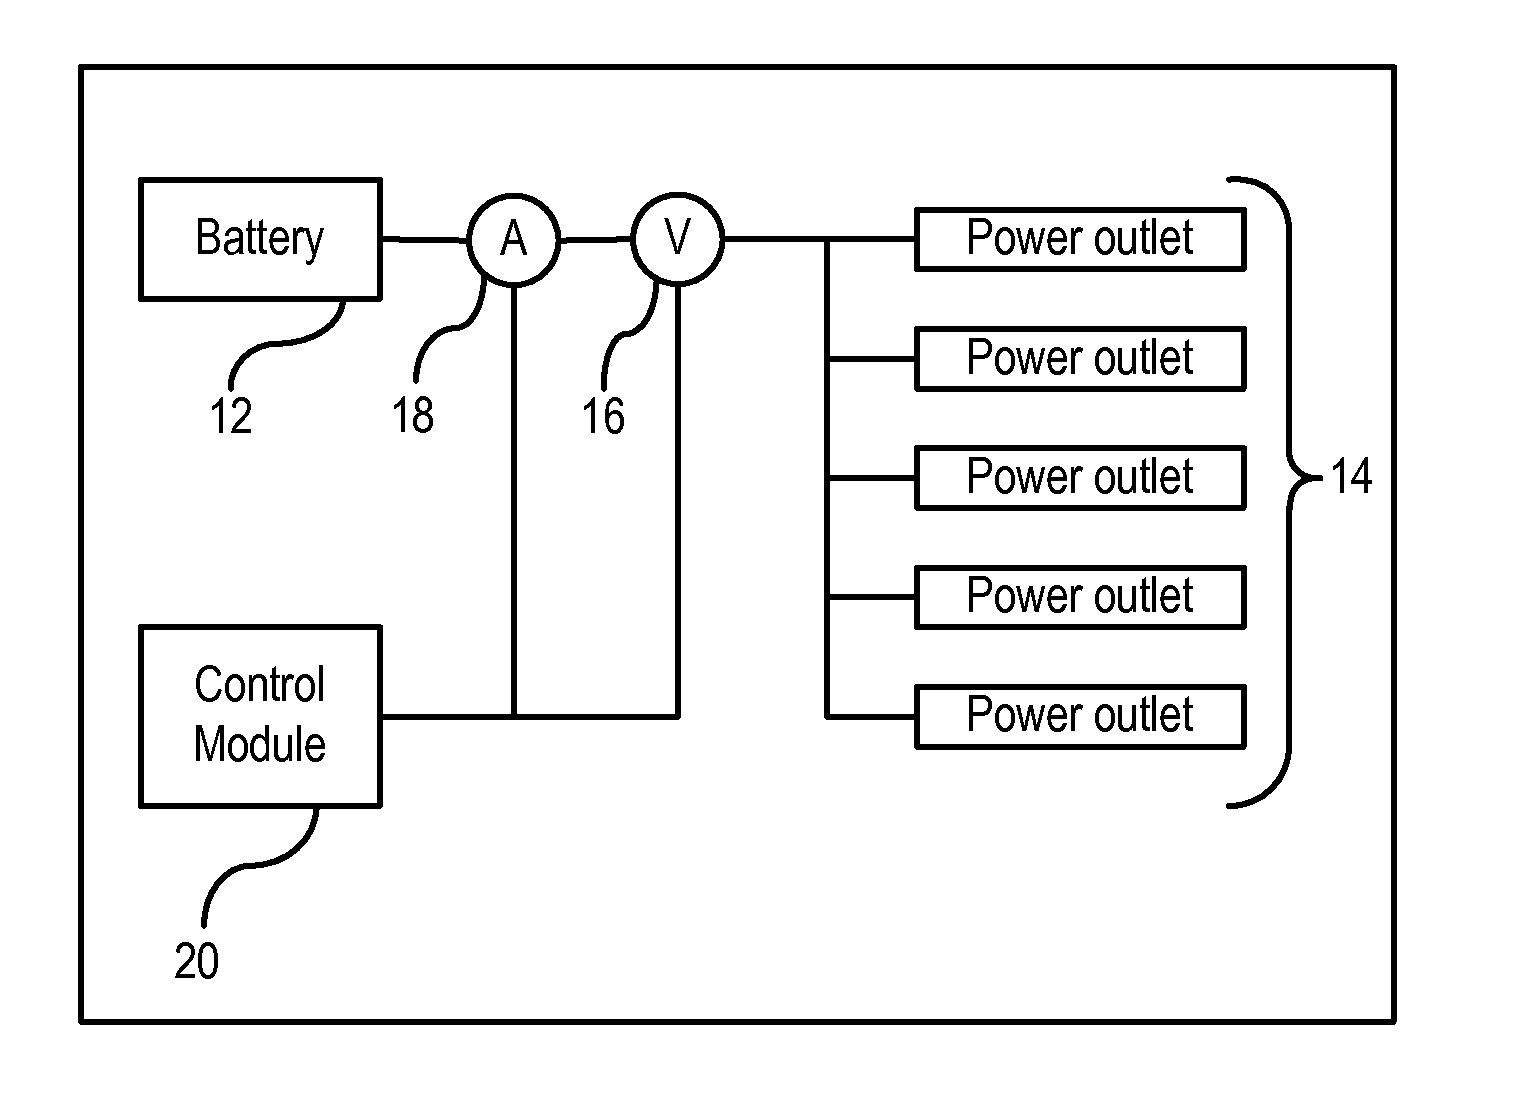 Battery state-of-charge estimator using robust H∞ observer